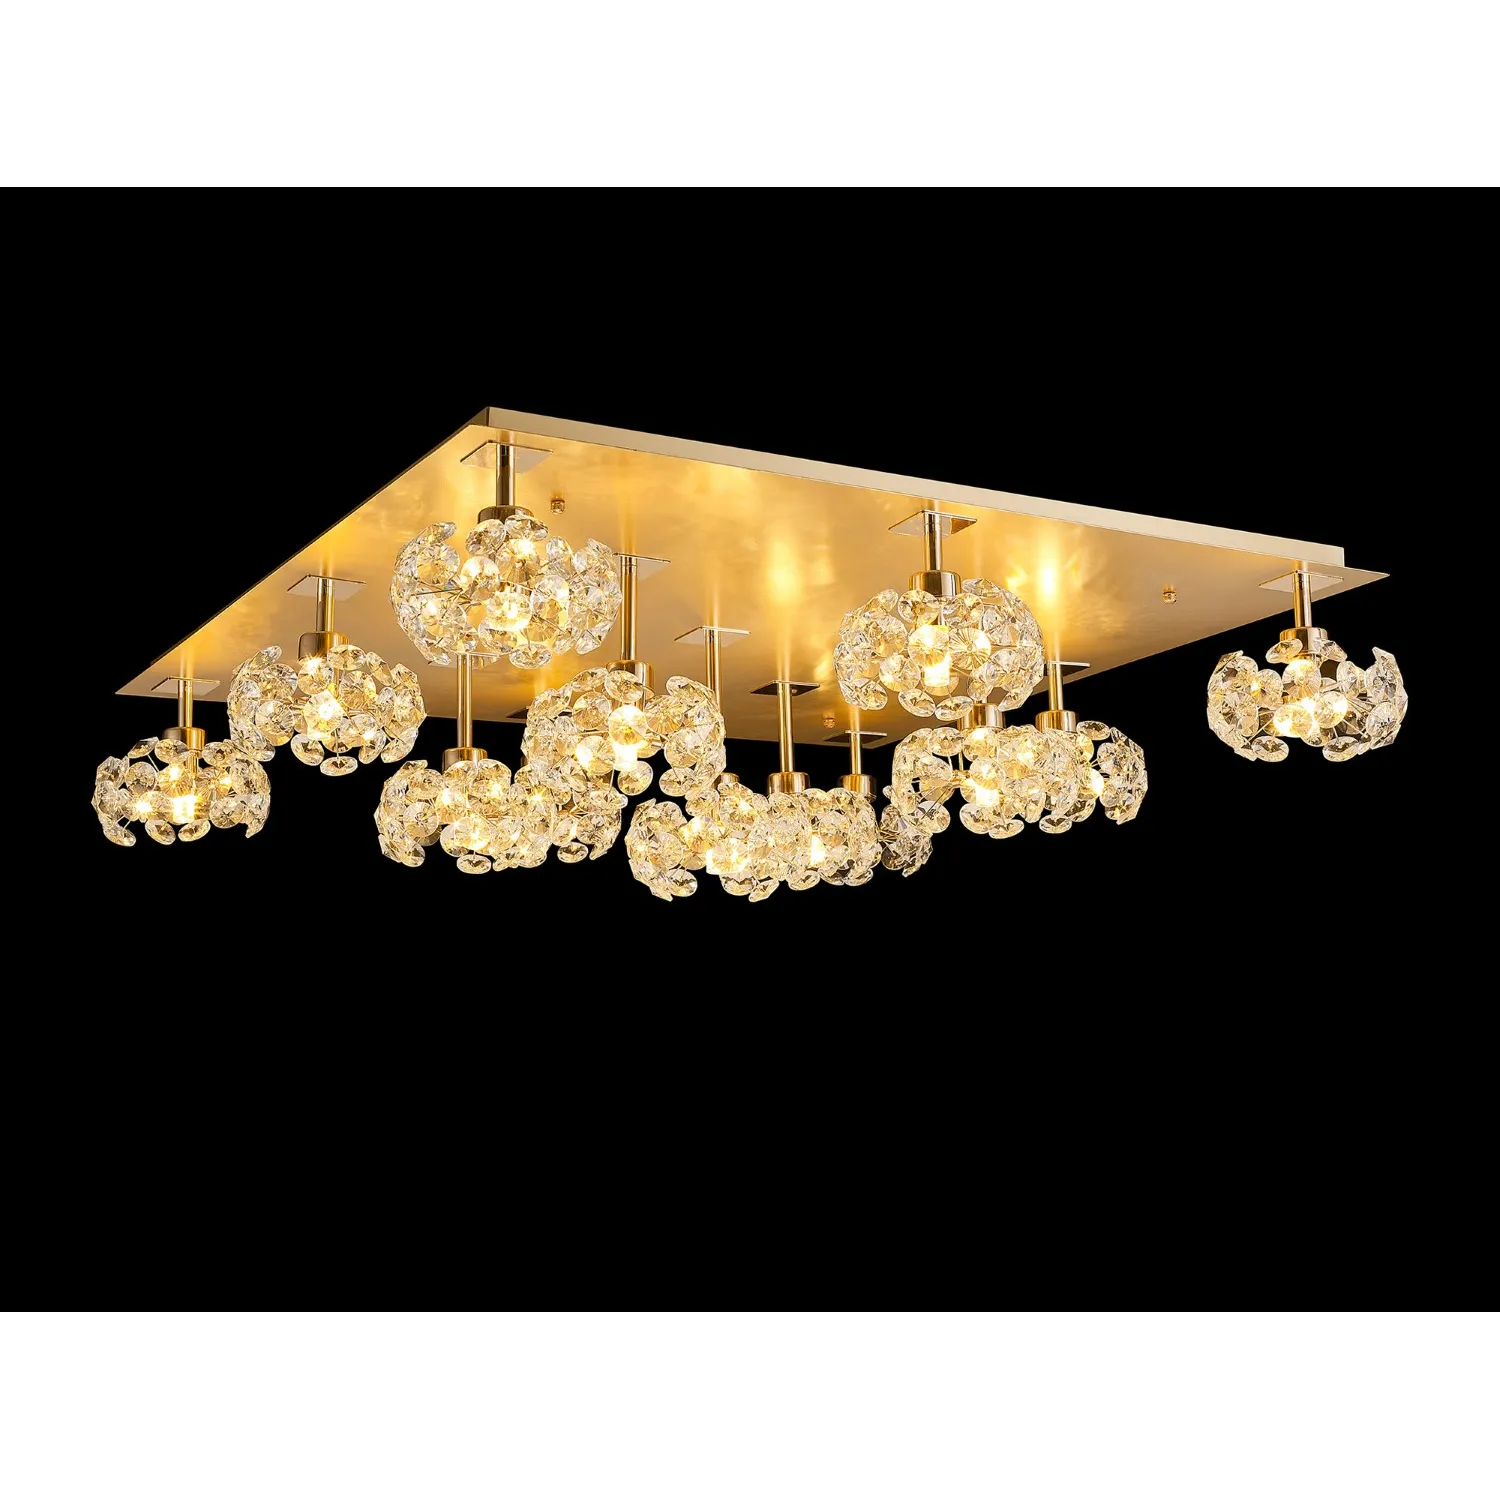 Camden Square 13 Light G9 Flush Light With French Gold Square And Crystal Shade, Item Weight: 17.2kg